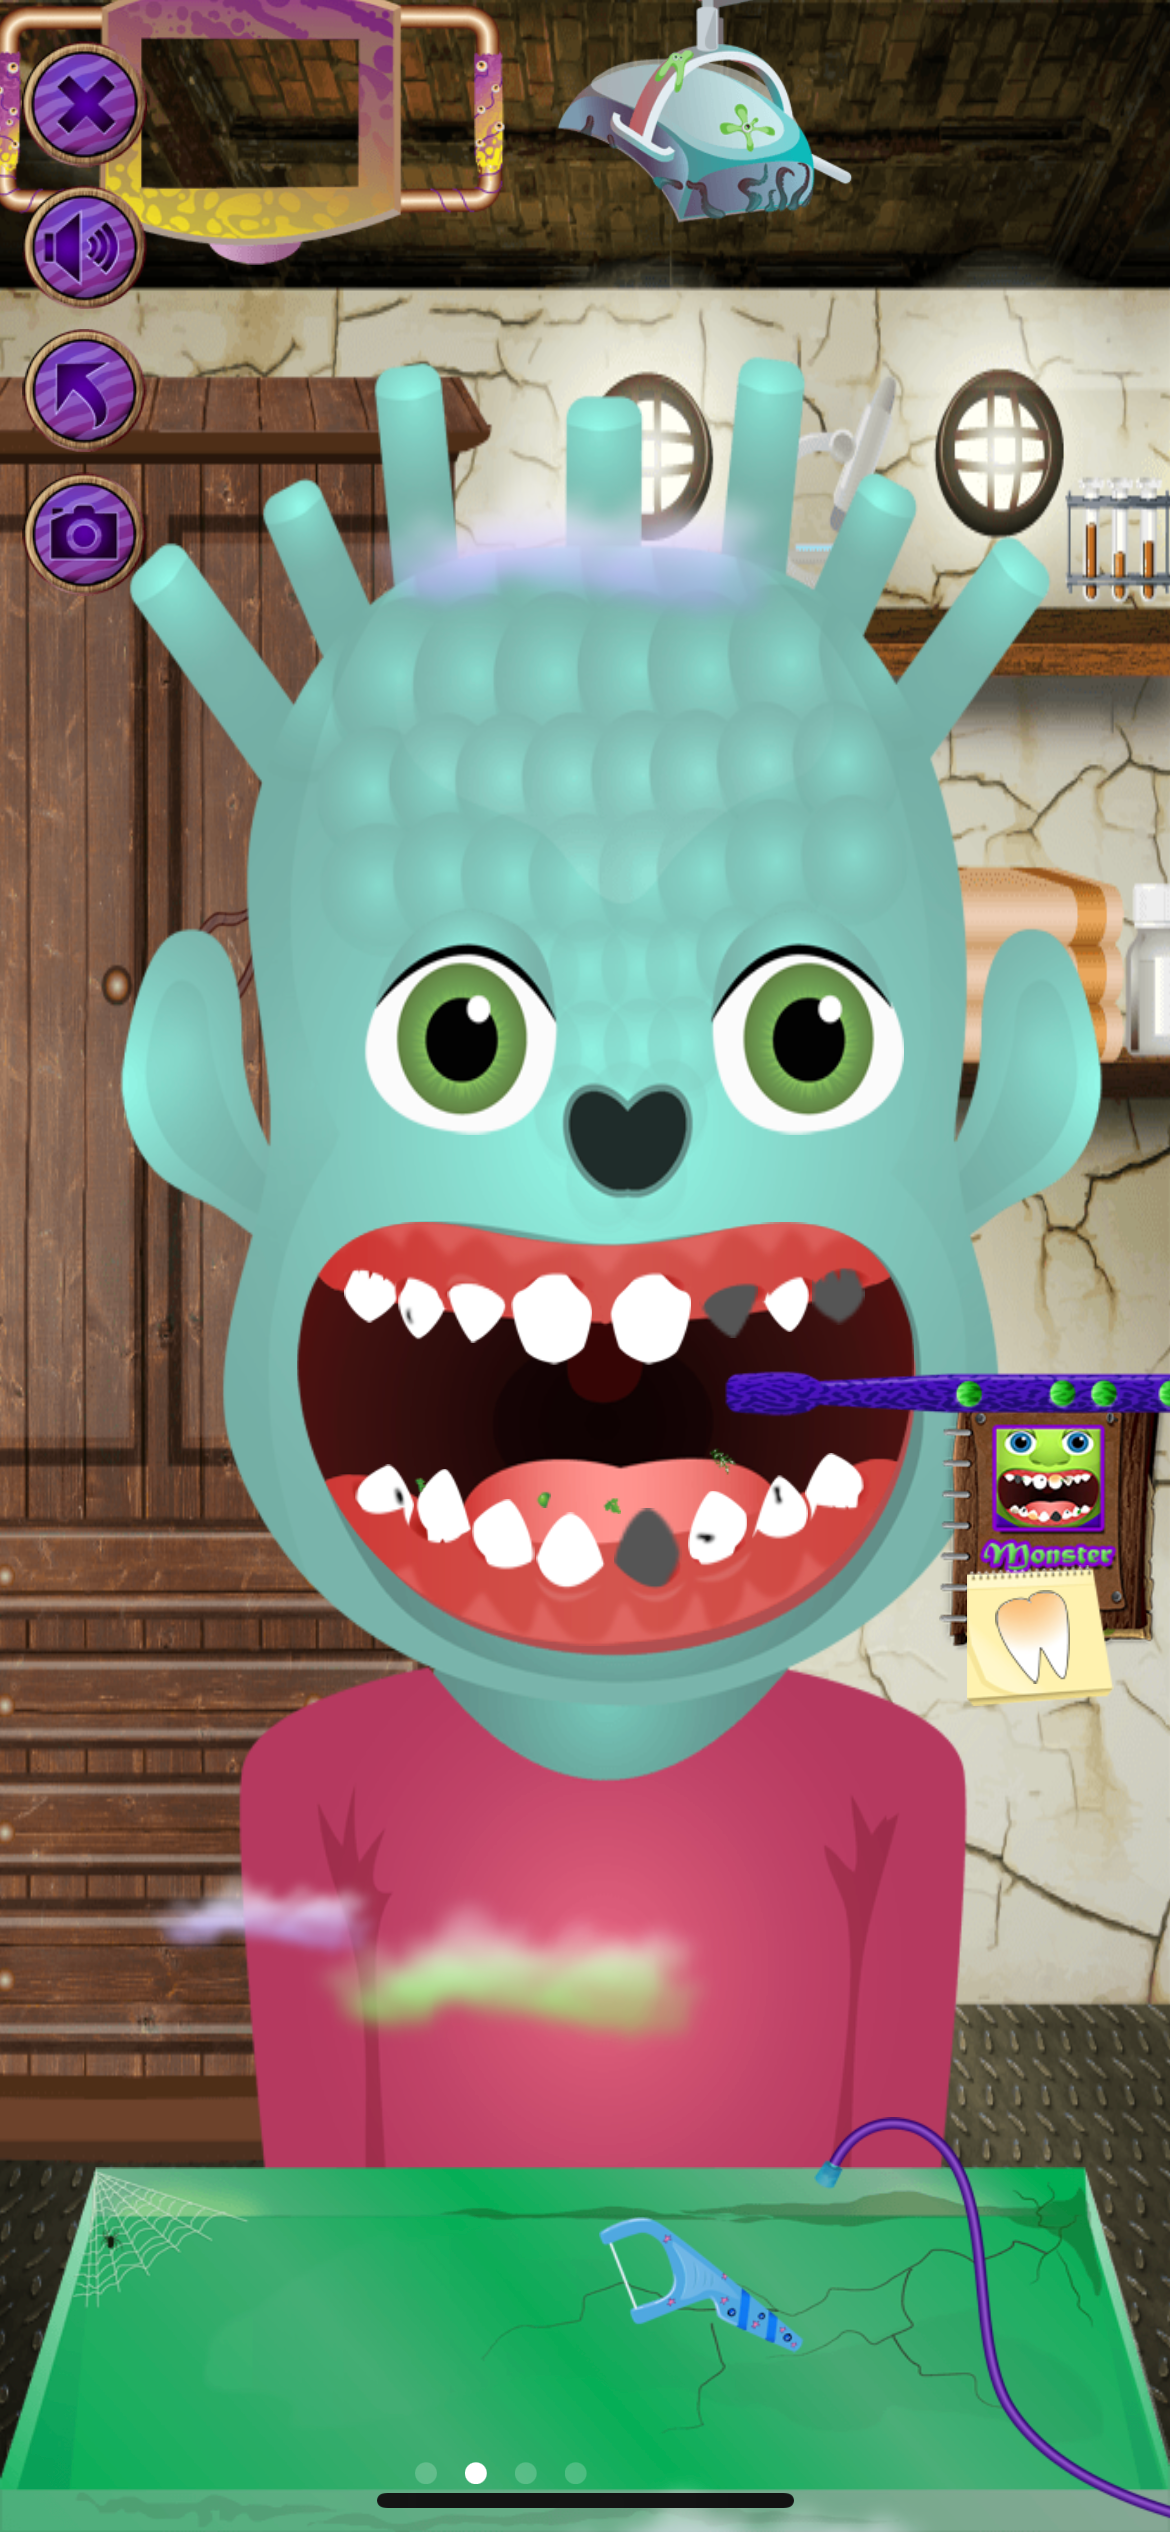 Monster Dentist App Screenshot showing the 2nd Monster in the game